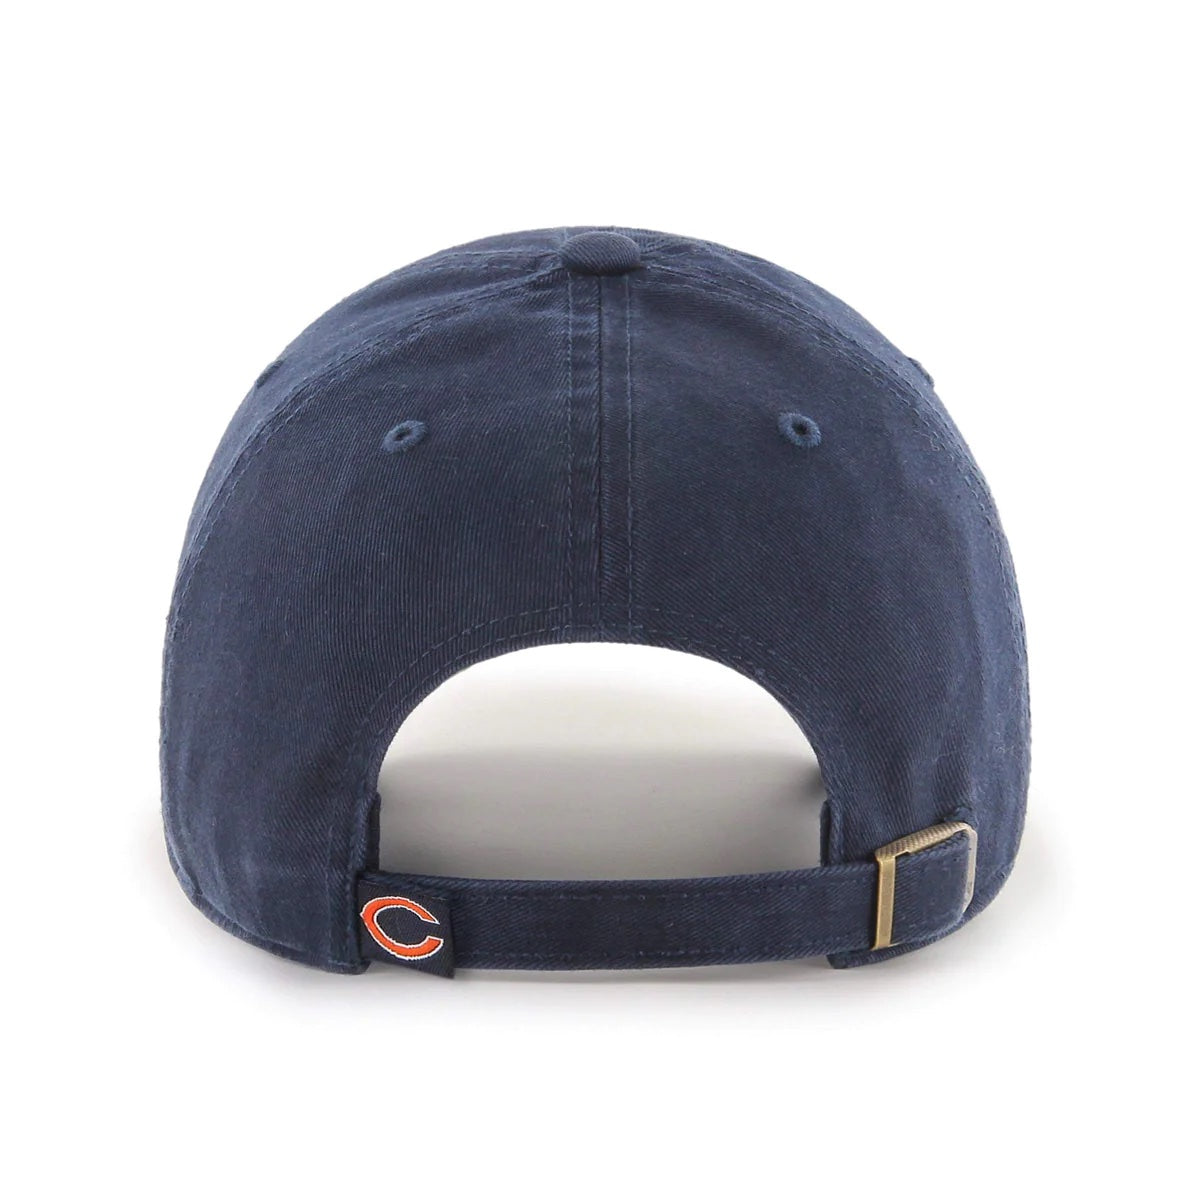 47 Brand Chicago Bears Clean Up Hat - Leaside Hockey Shop Inc.